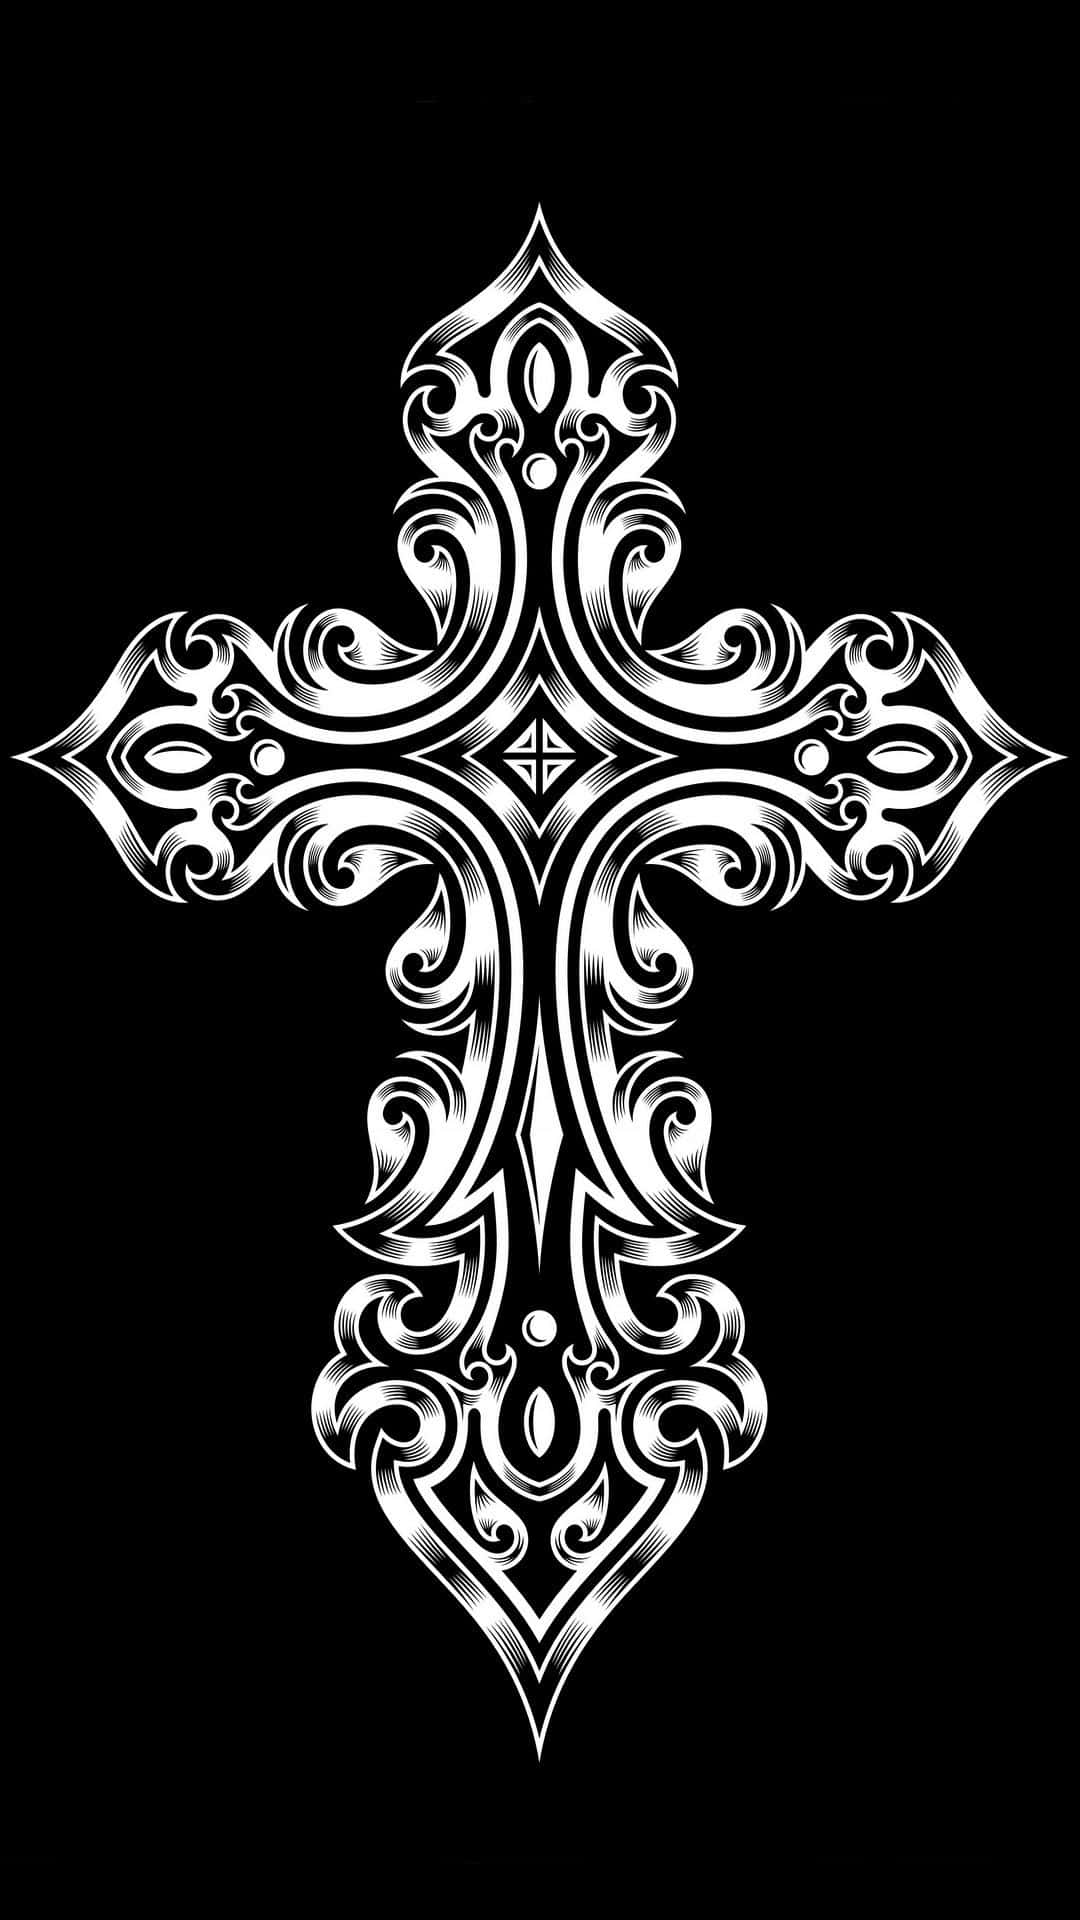 A Cross With An Ornate Design On A Black Background Wallpaper